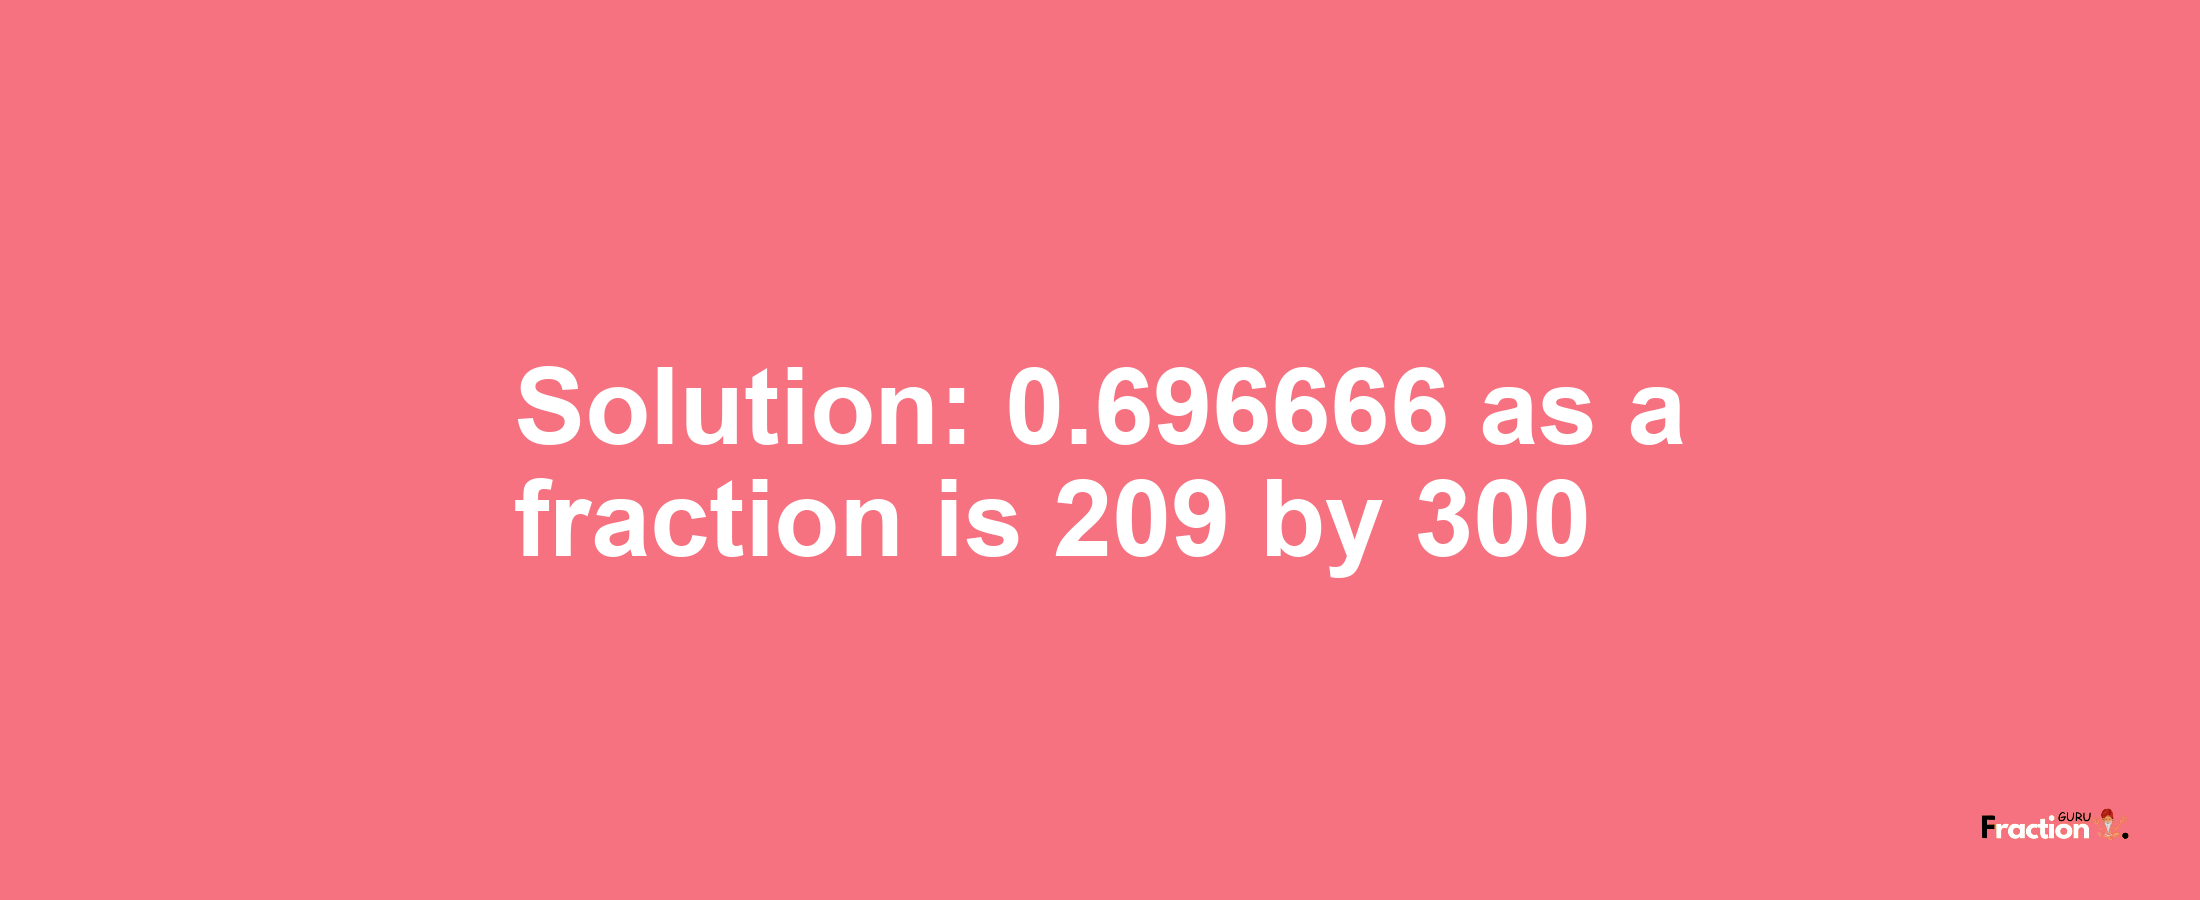 Solution:0.696666 as a fraction is 209/300